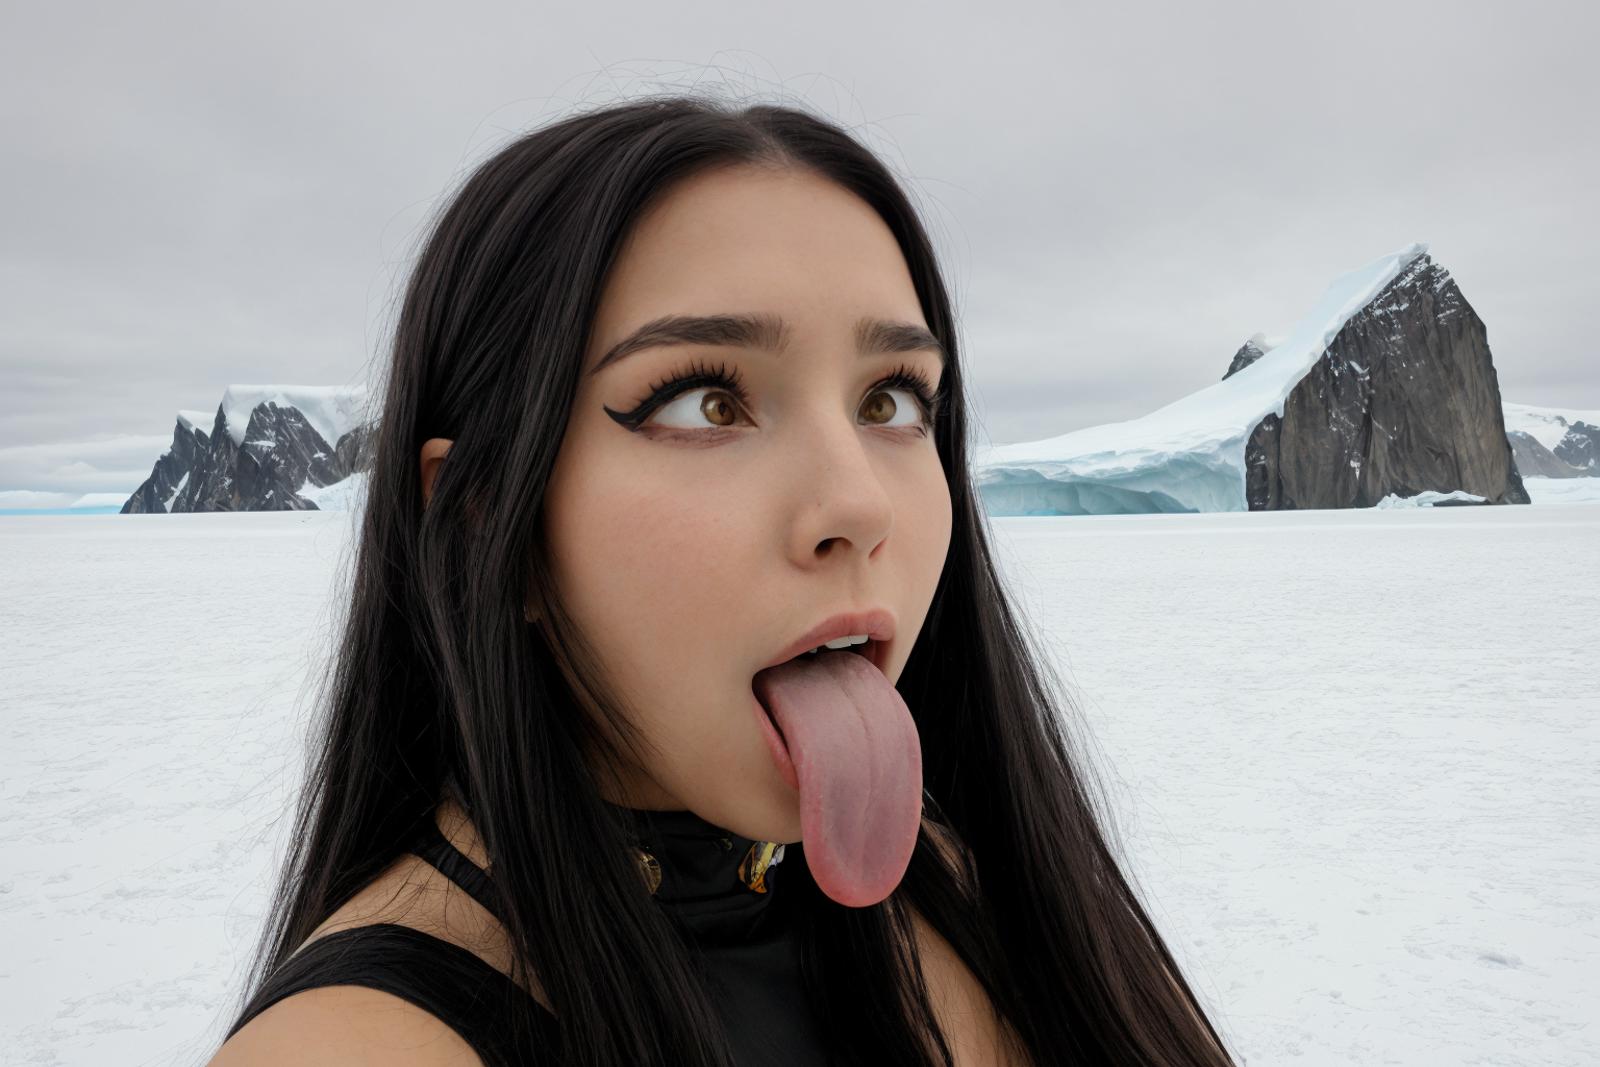 Tongues And Ahegao image by Kasmir